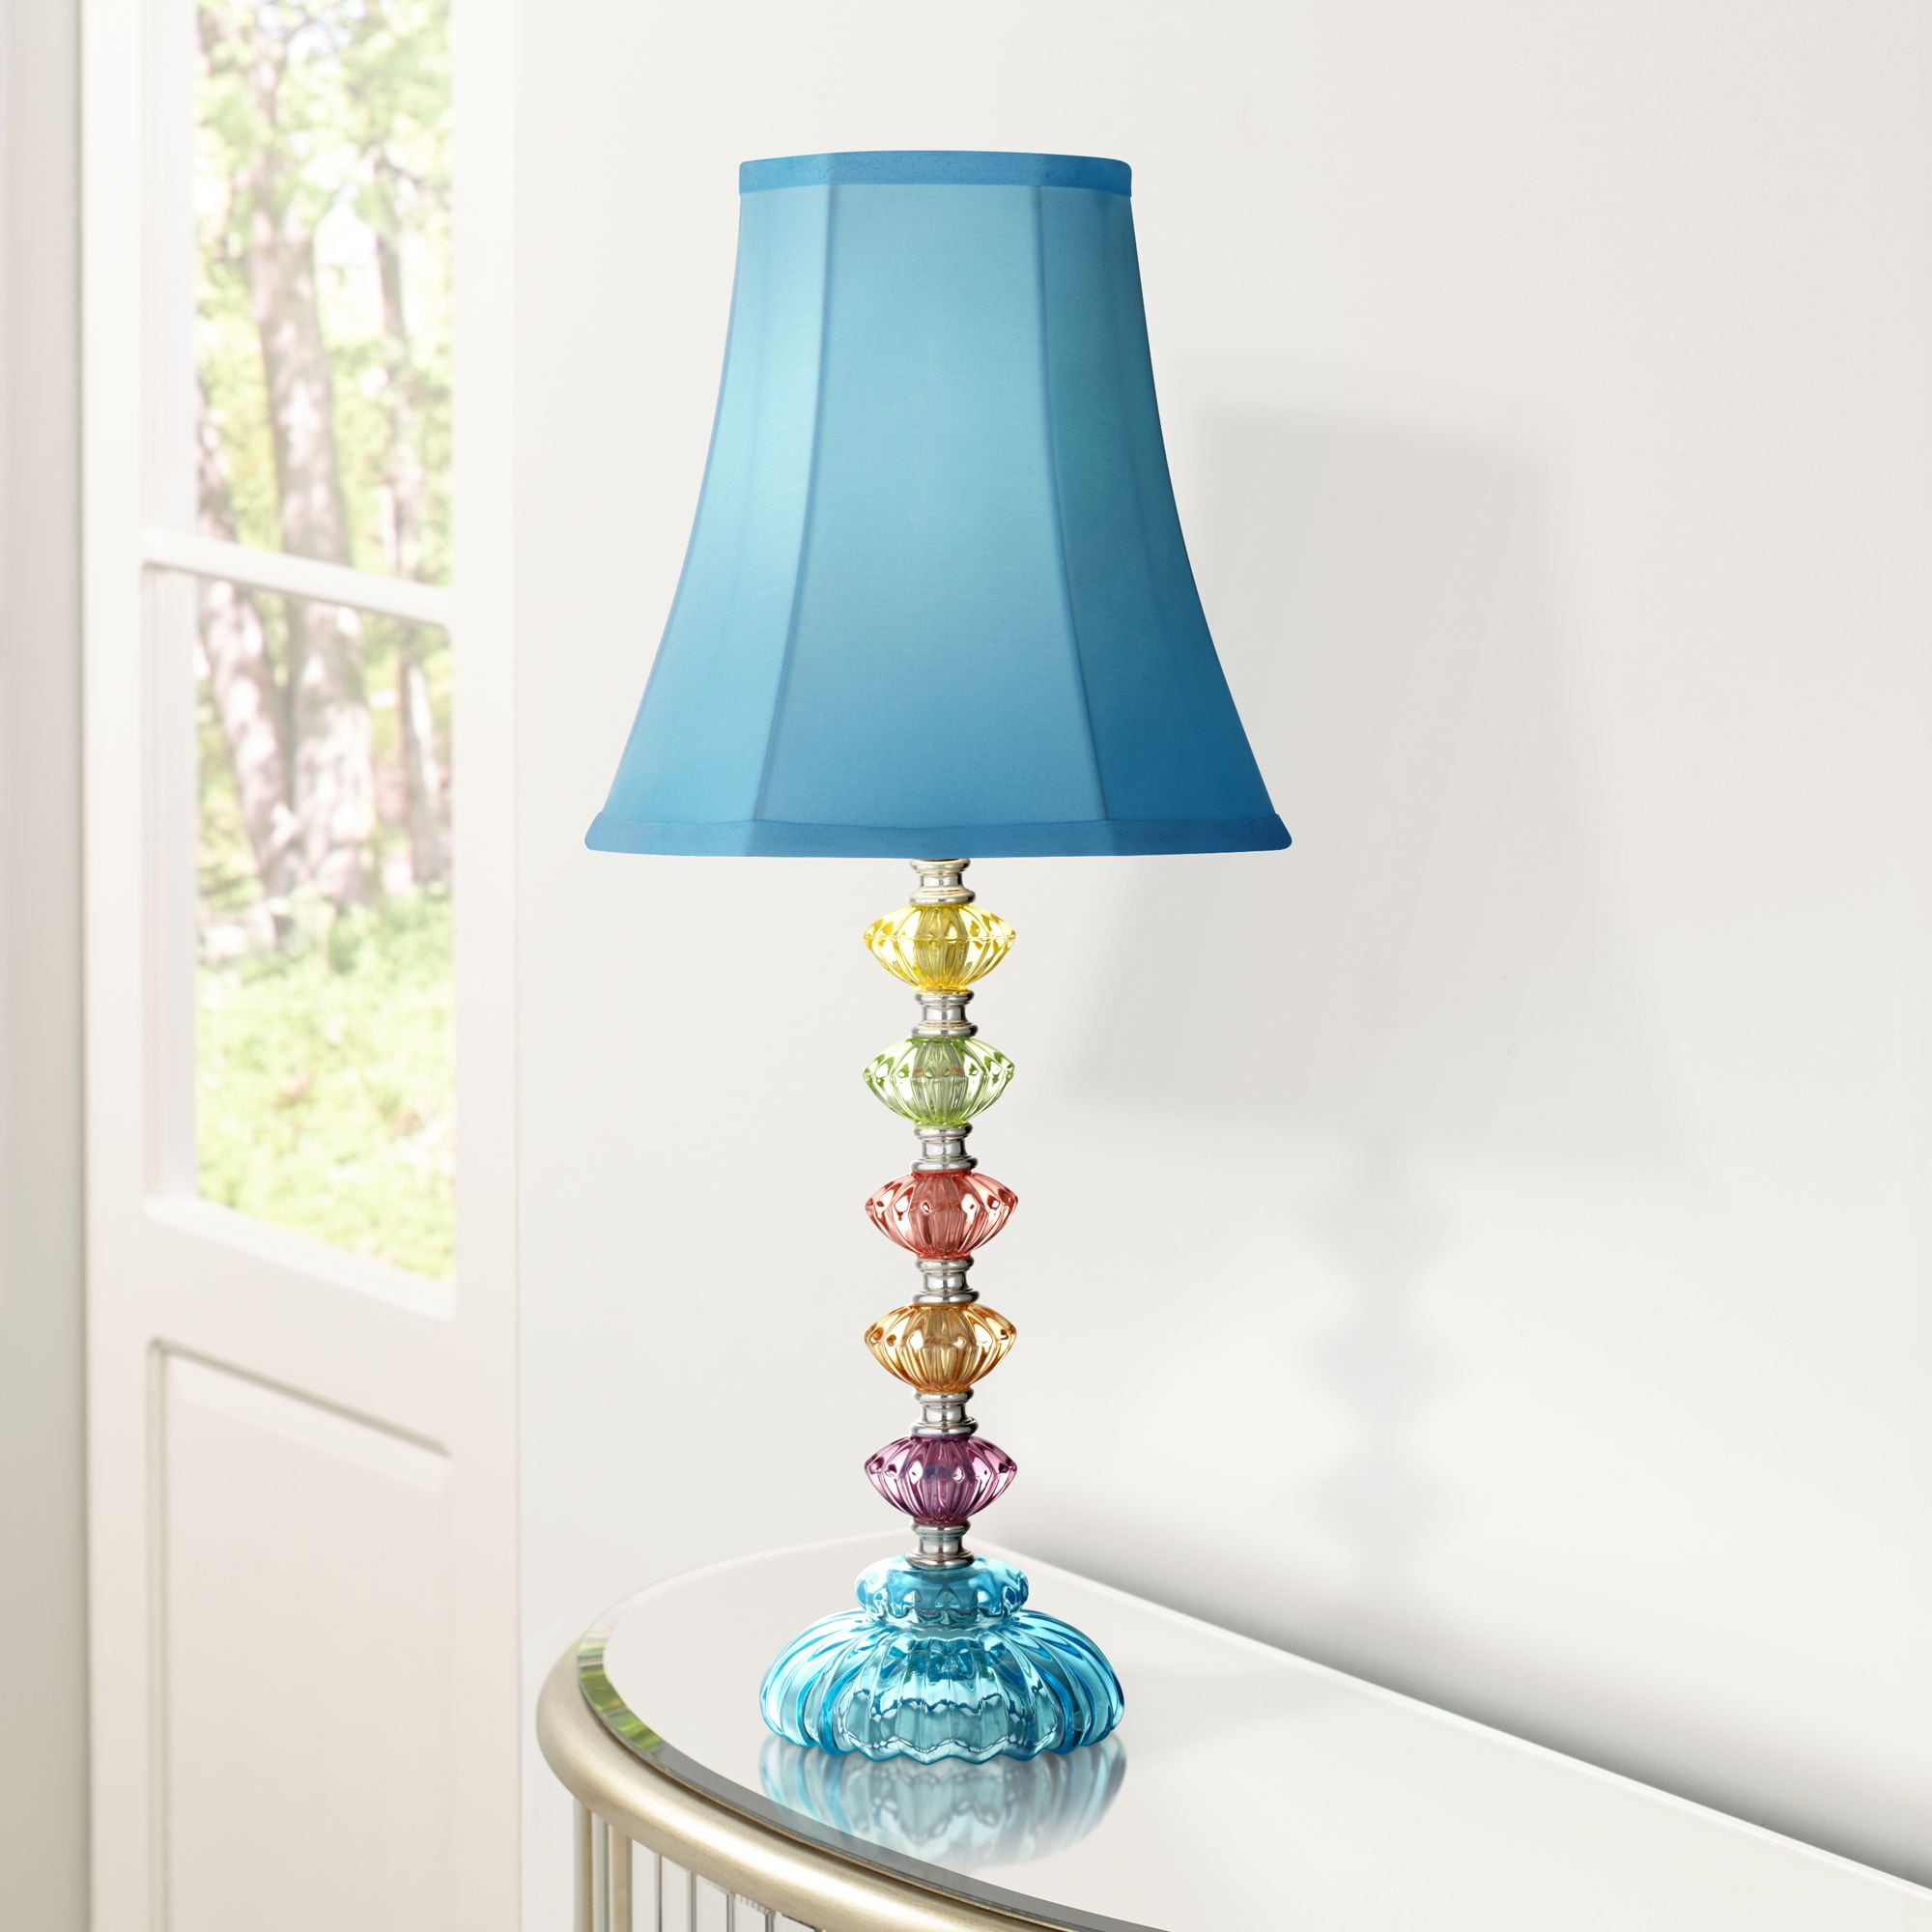 360 Lighting Bohemian Accent Table Lamp, Best Clear Glass Table Lamps